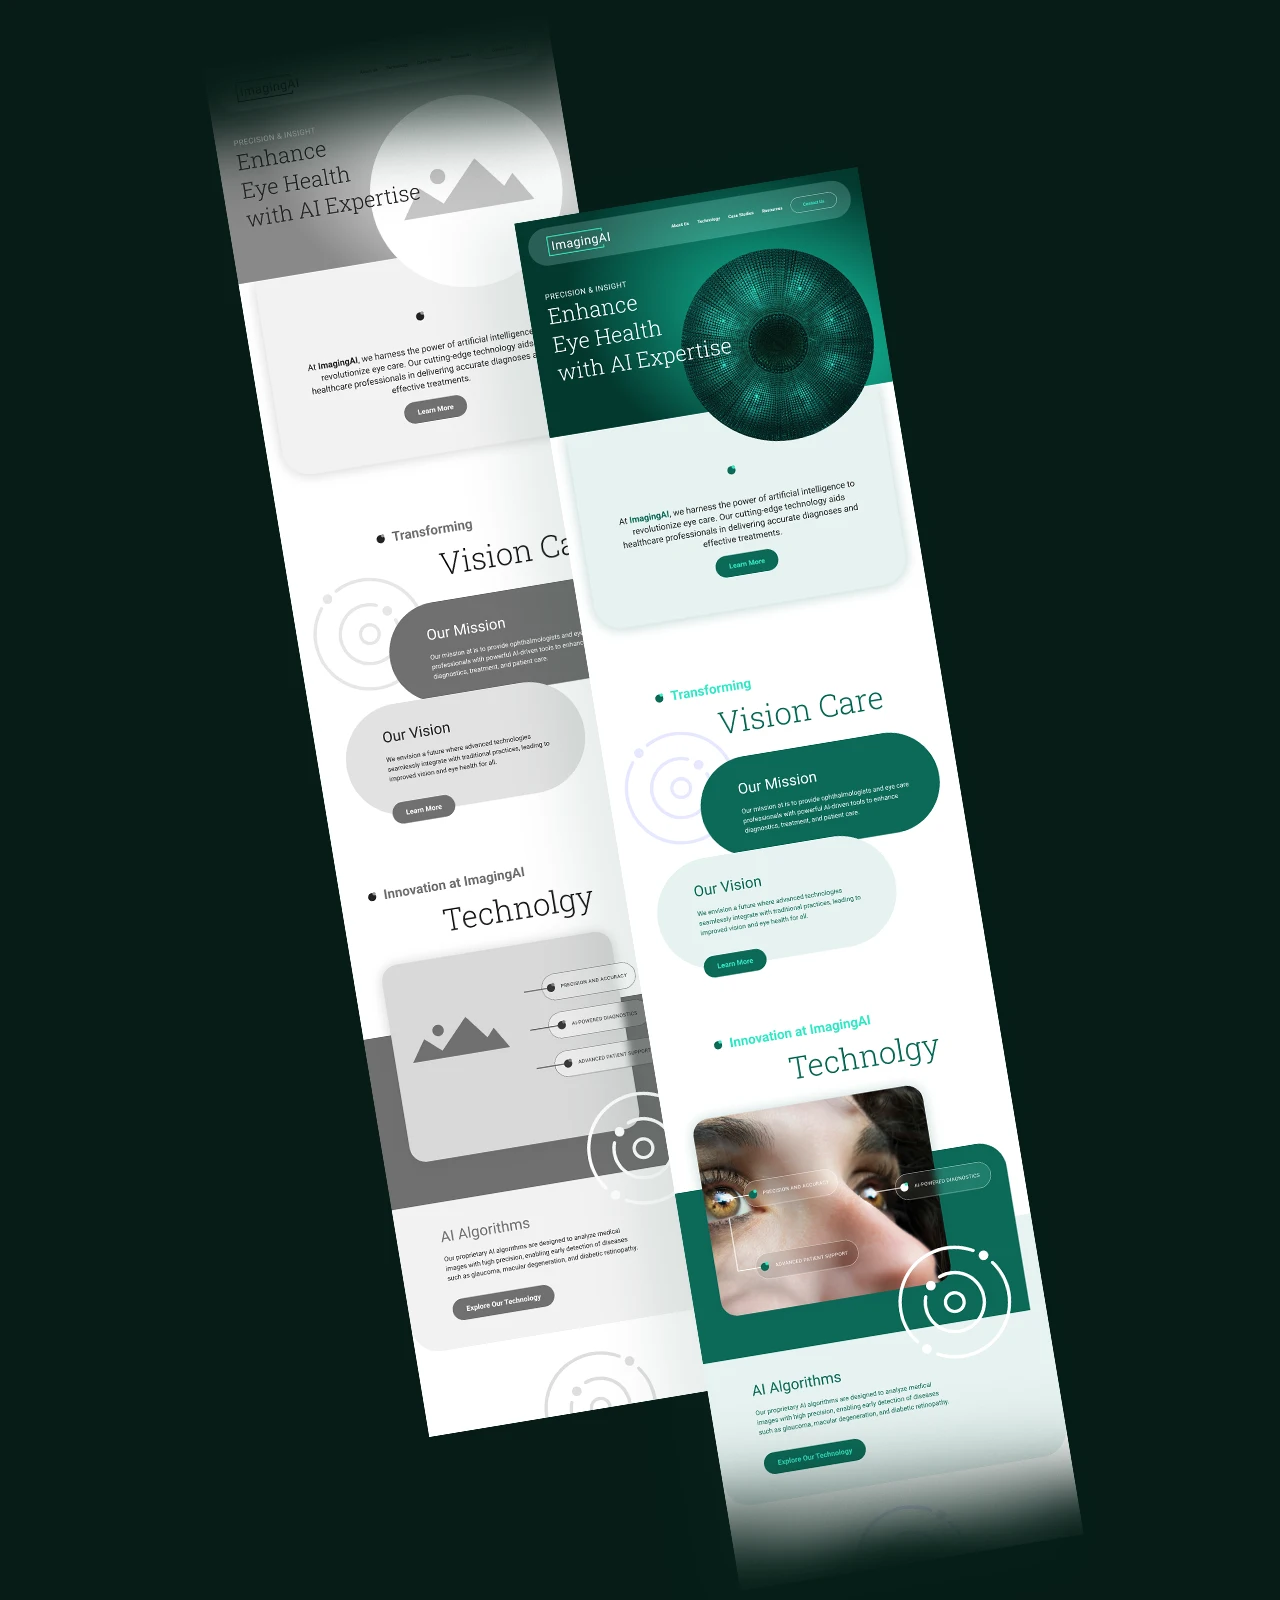 Wireframe designs to web ui ux designs for an eye care artificial intelligence company.